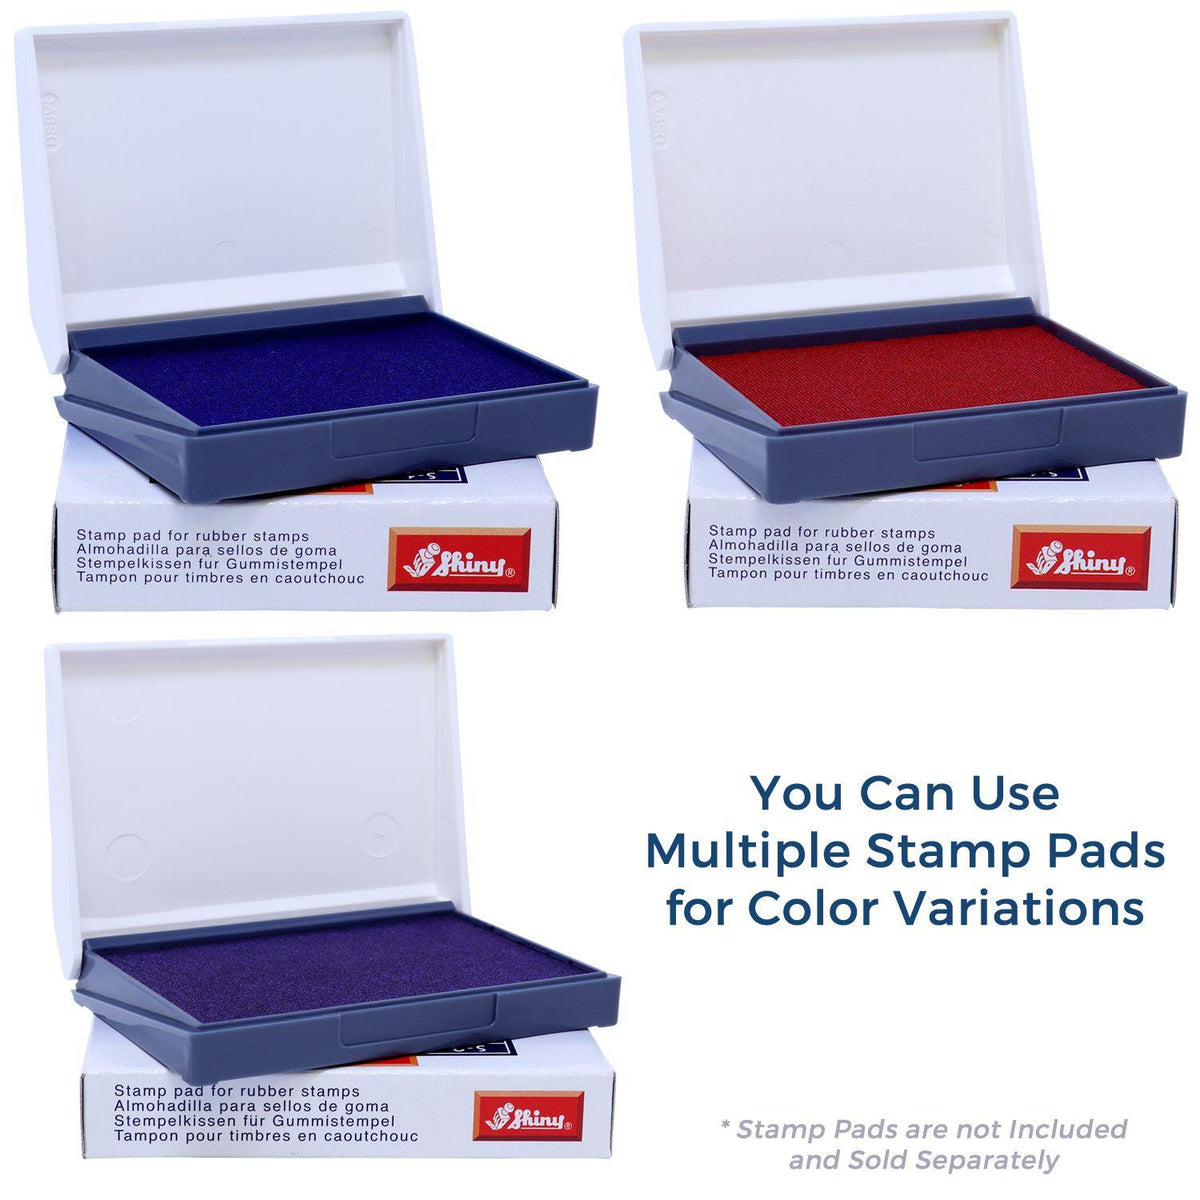 Stamp Pads for Large Correo Aero Rubber Stamp Available